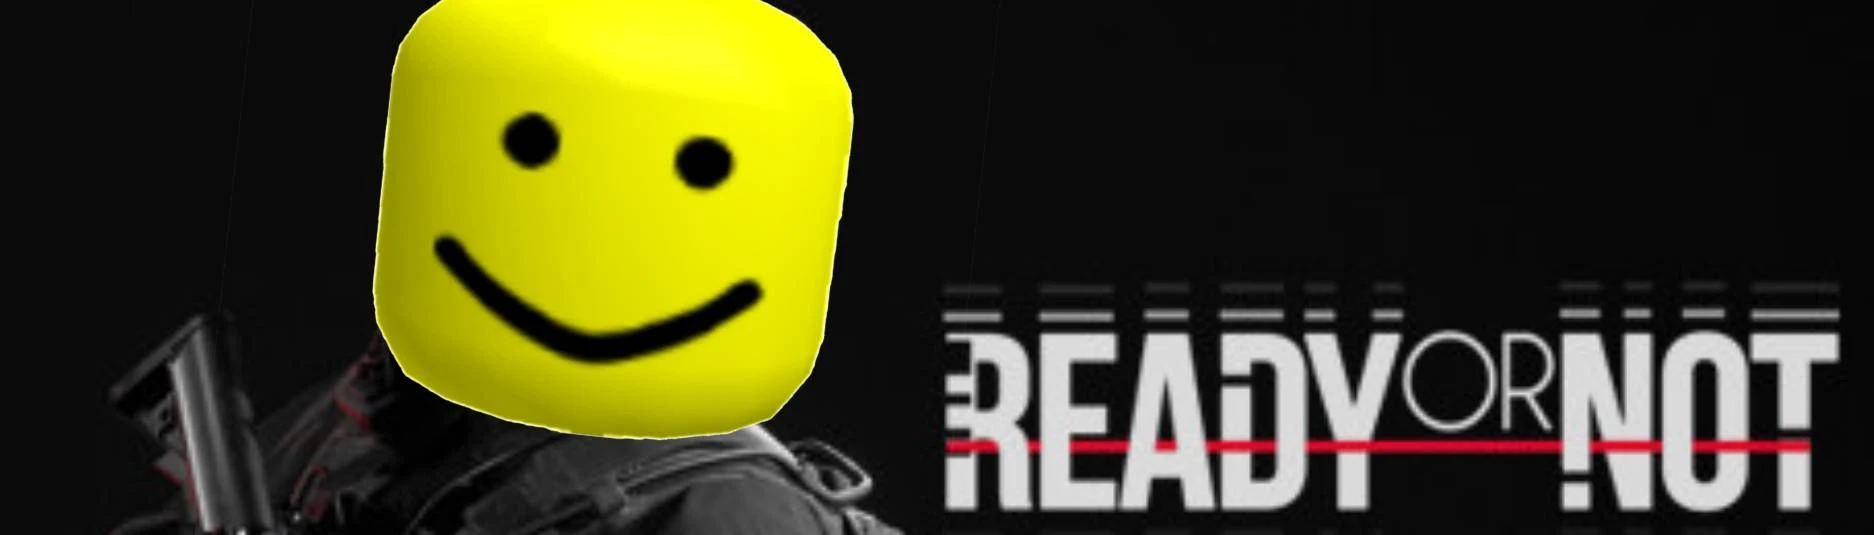 ROBLOX OOF DEATH SOUND COMPILATION (Roblox OOF Sound, Roblox